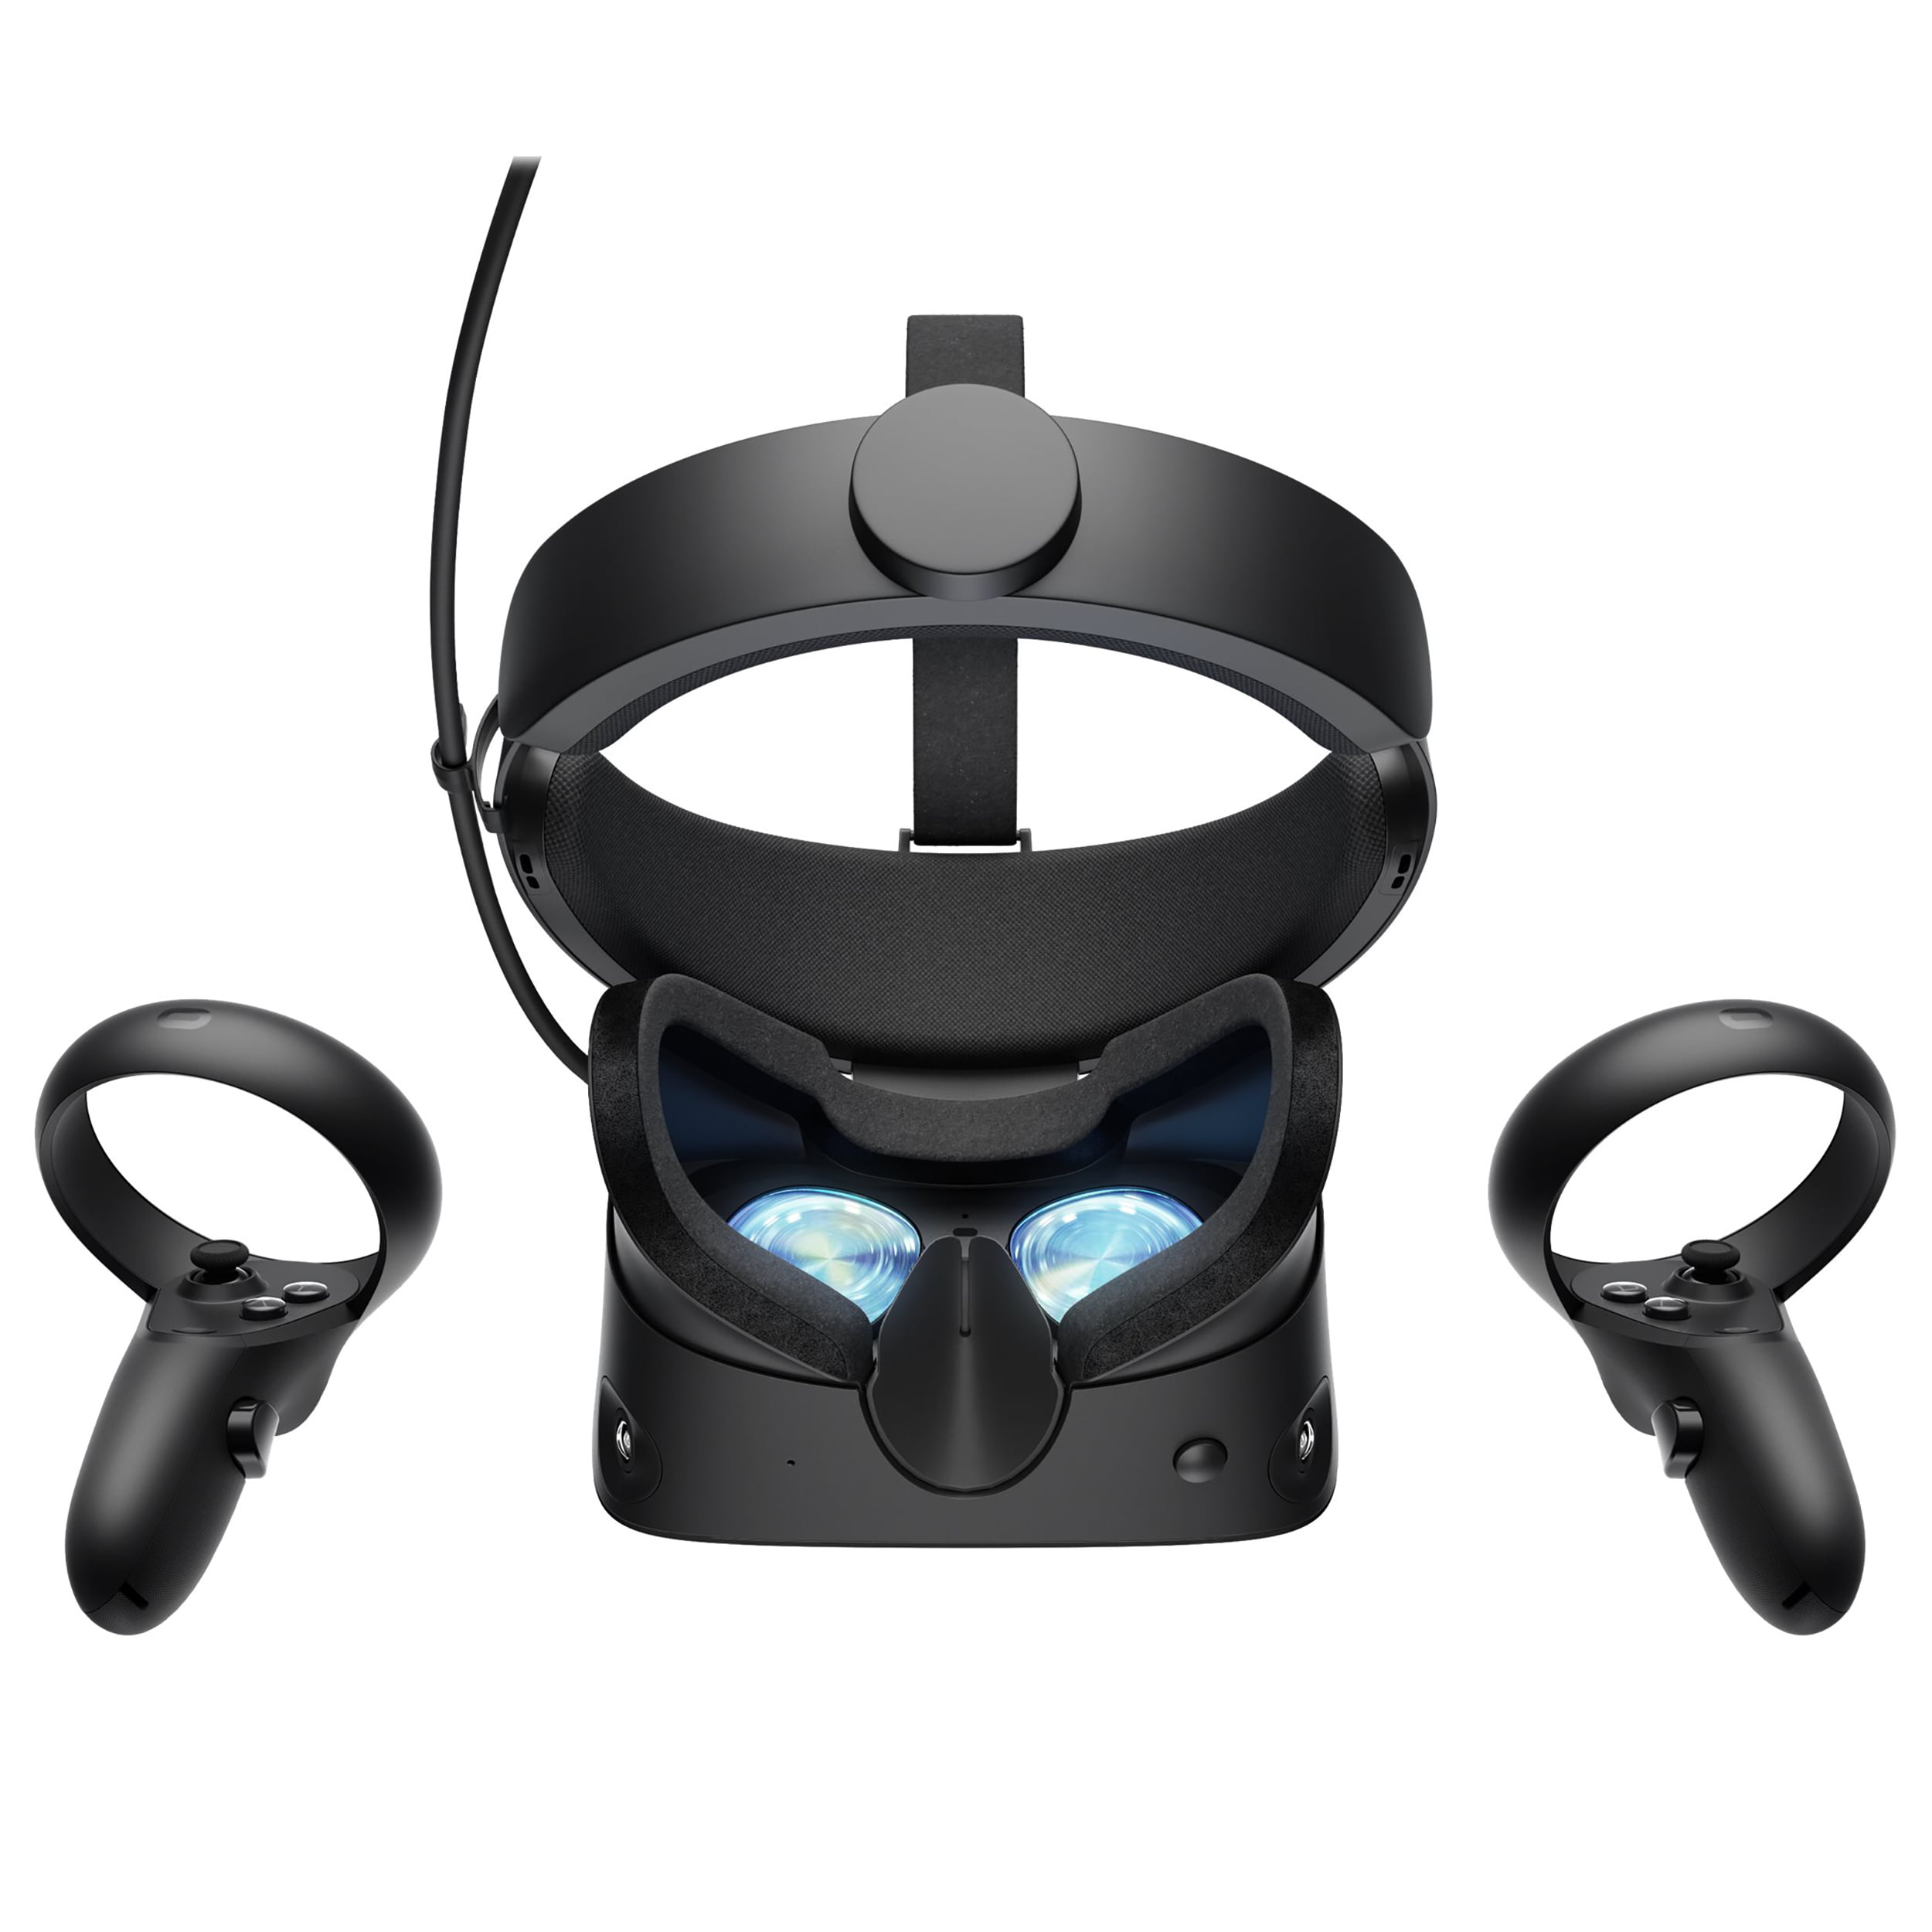 Oculus Rift S PC Powered VR Gaming Black Touch Controller, 3D Audio, Built-in Room-Scale Insight Tracking, Fit Wheel Adjustable Halo Headband - Walmart.com